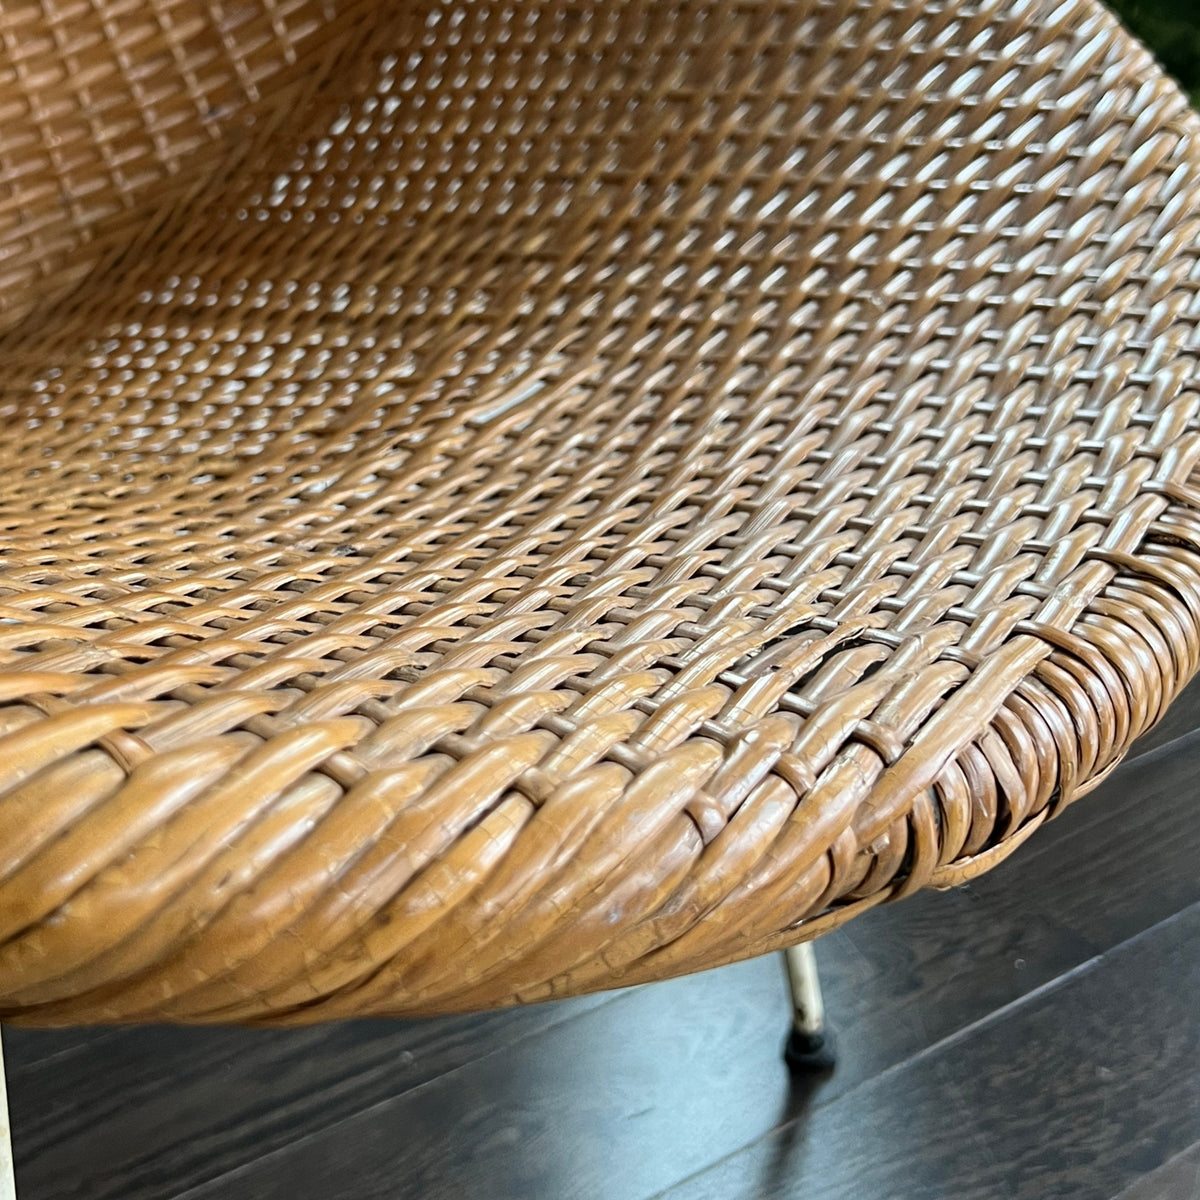 Vintage Woven Lounge Chair